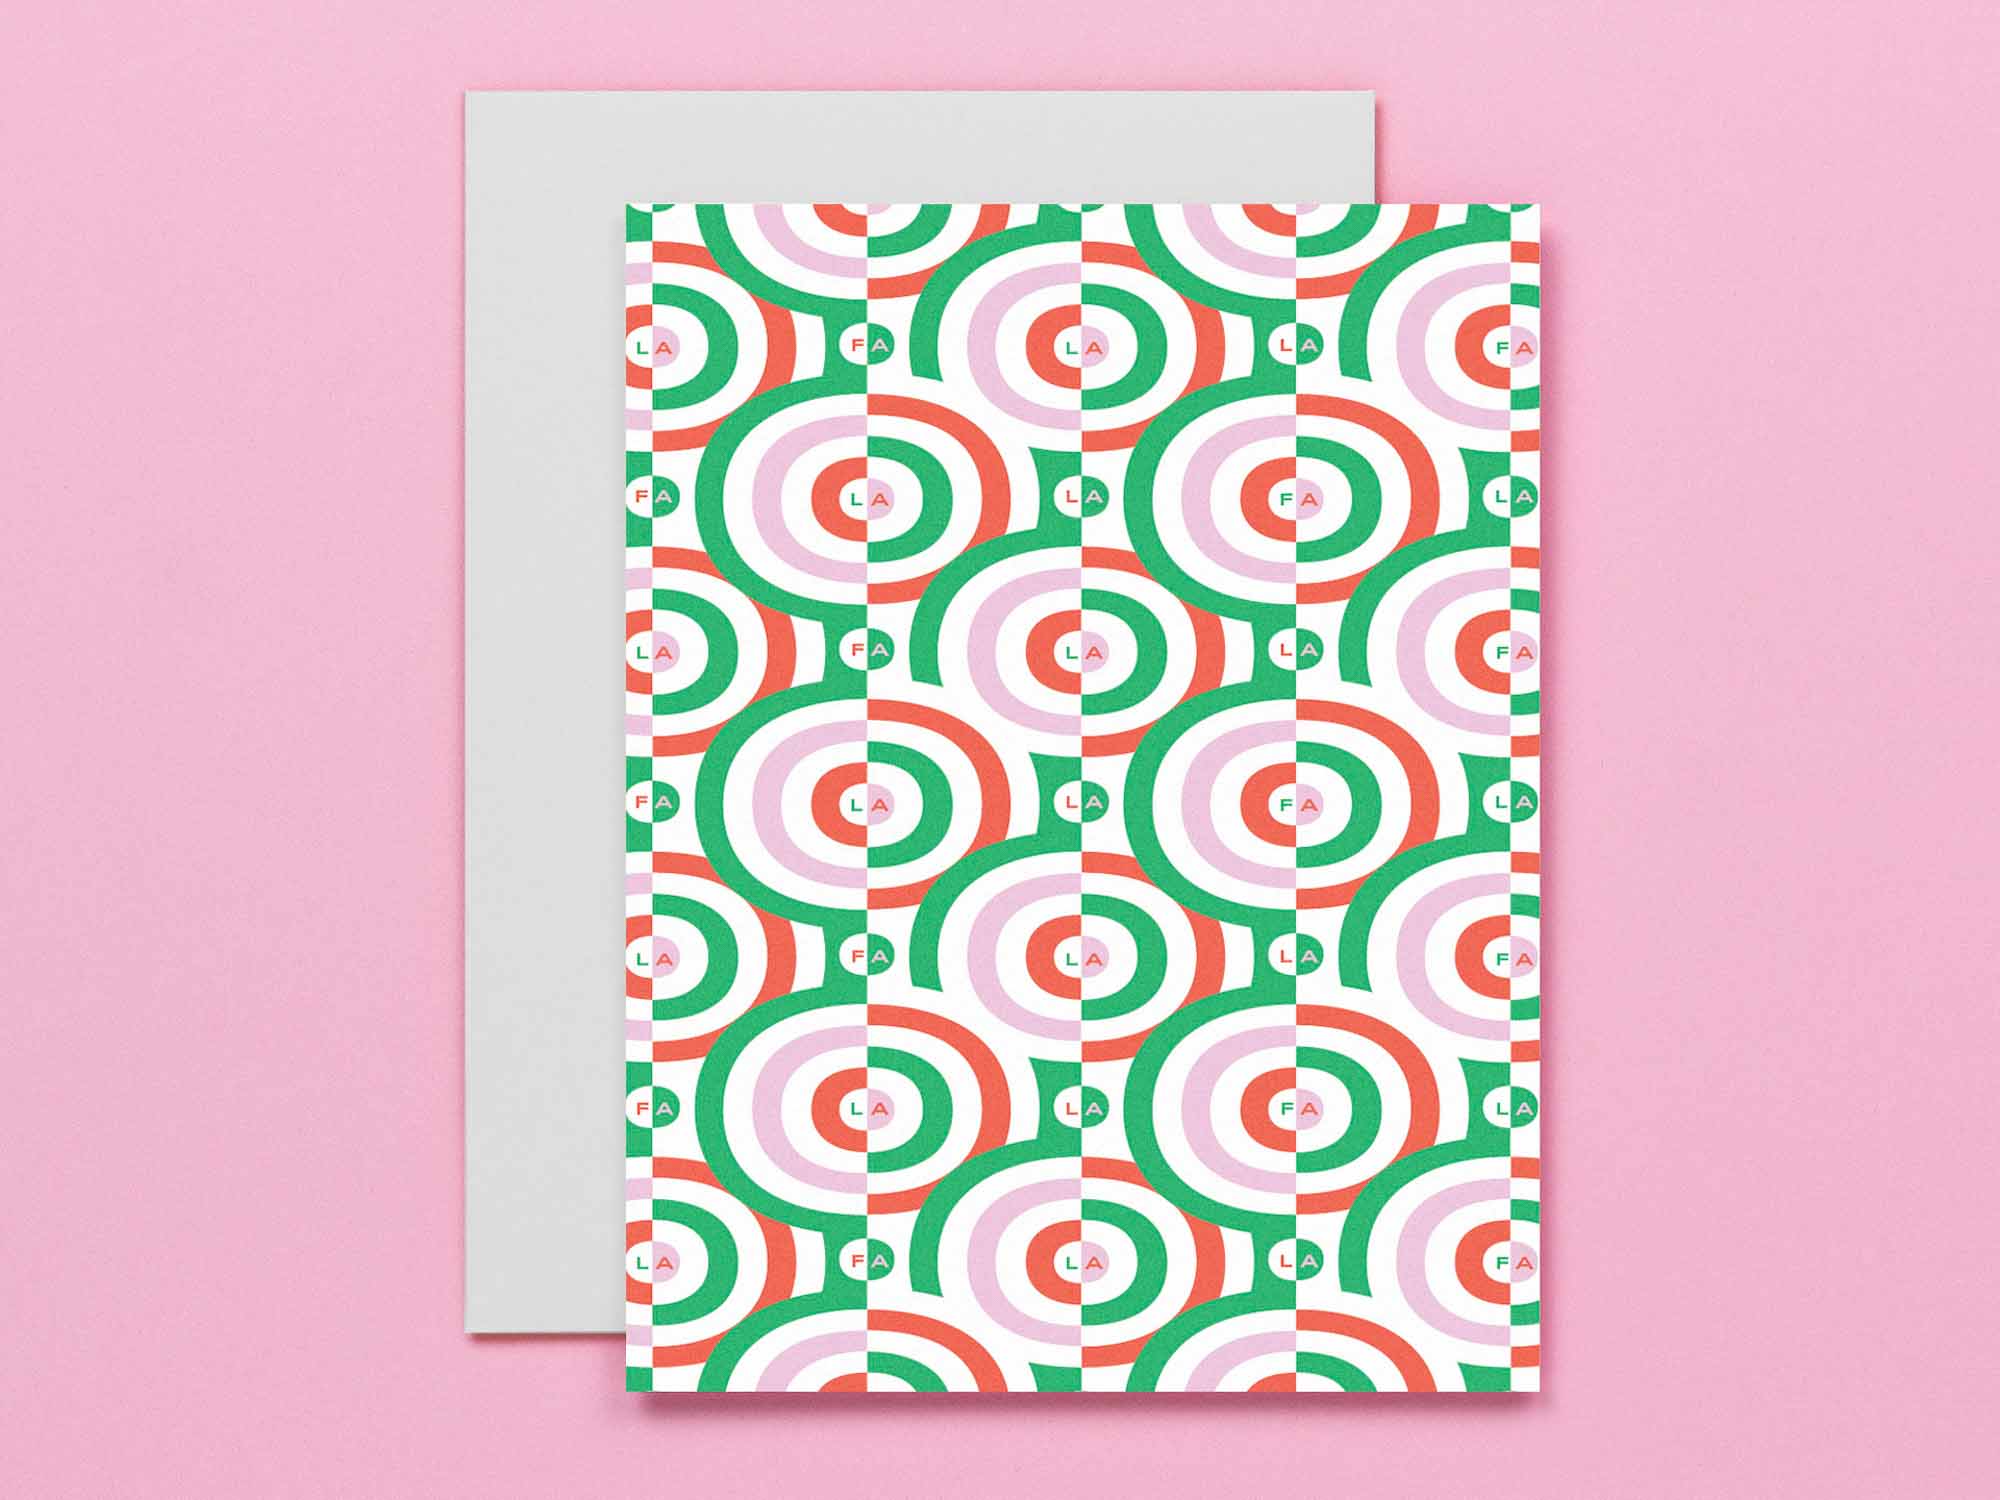 Mid-century and op art inspired pattern holiday card made up of hypnotic nested rings and nestled fa la la la las. Made in USA by @mydarlin_bk